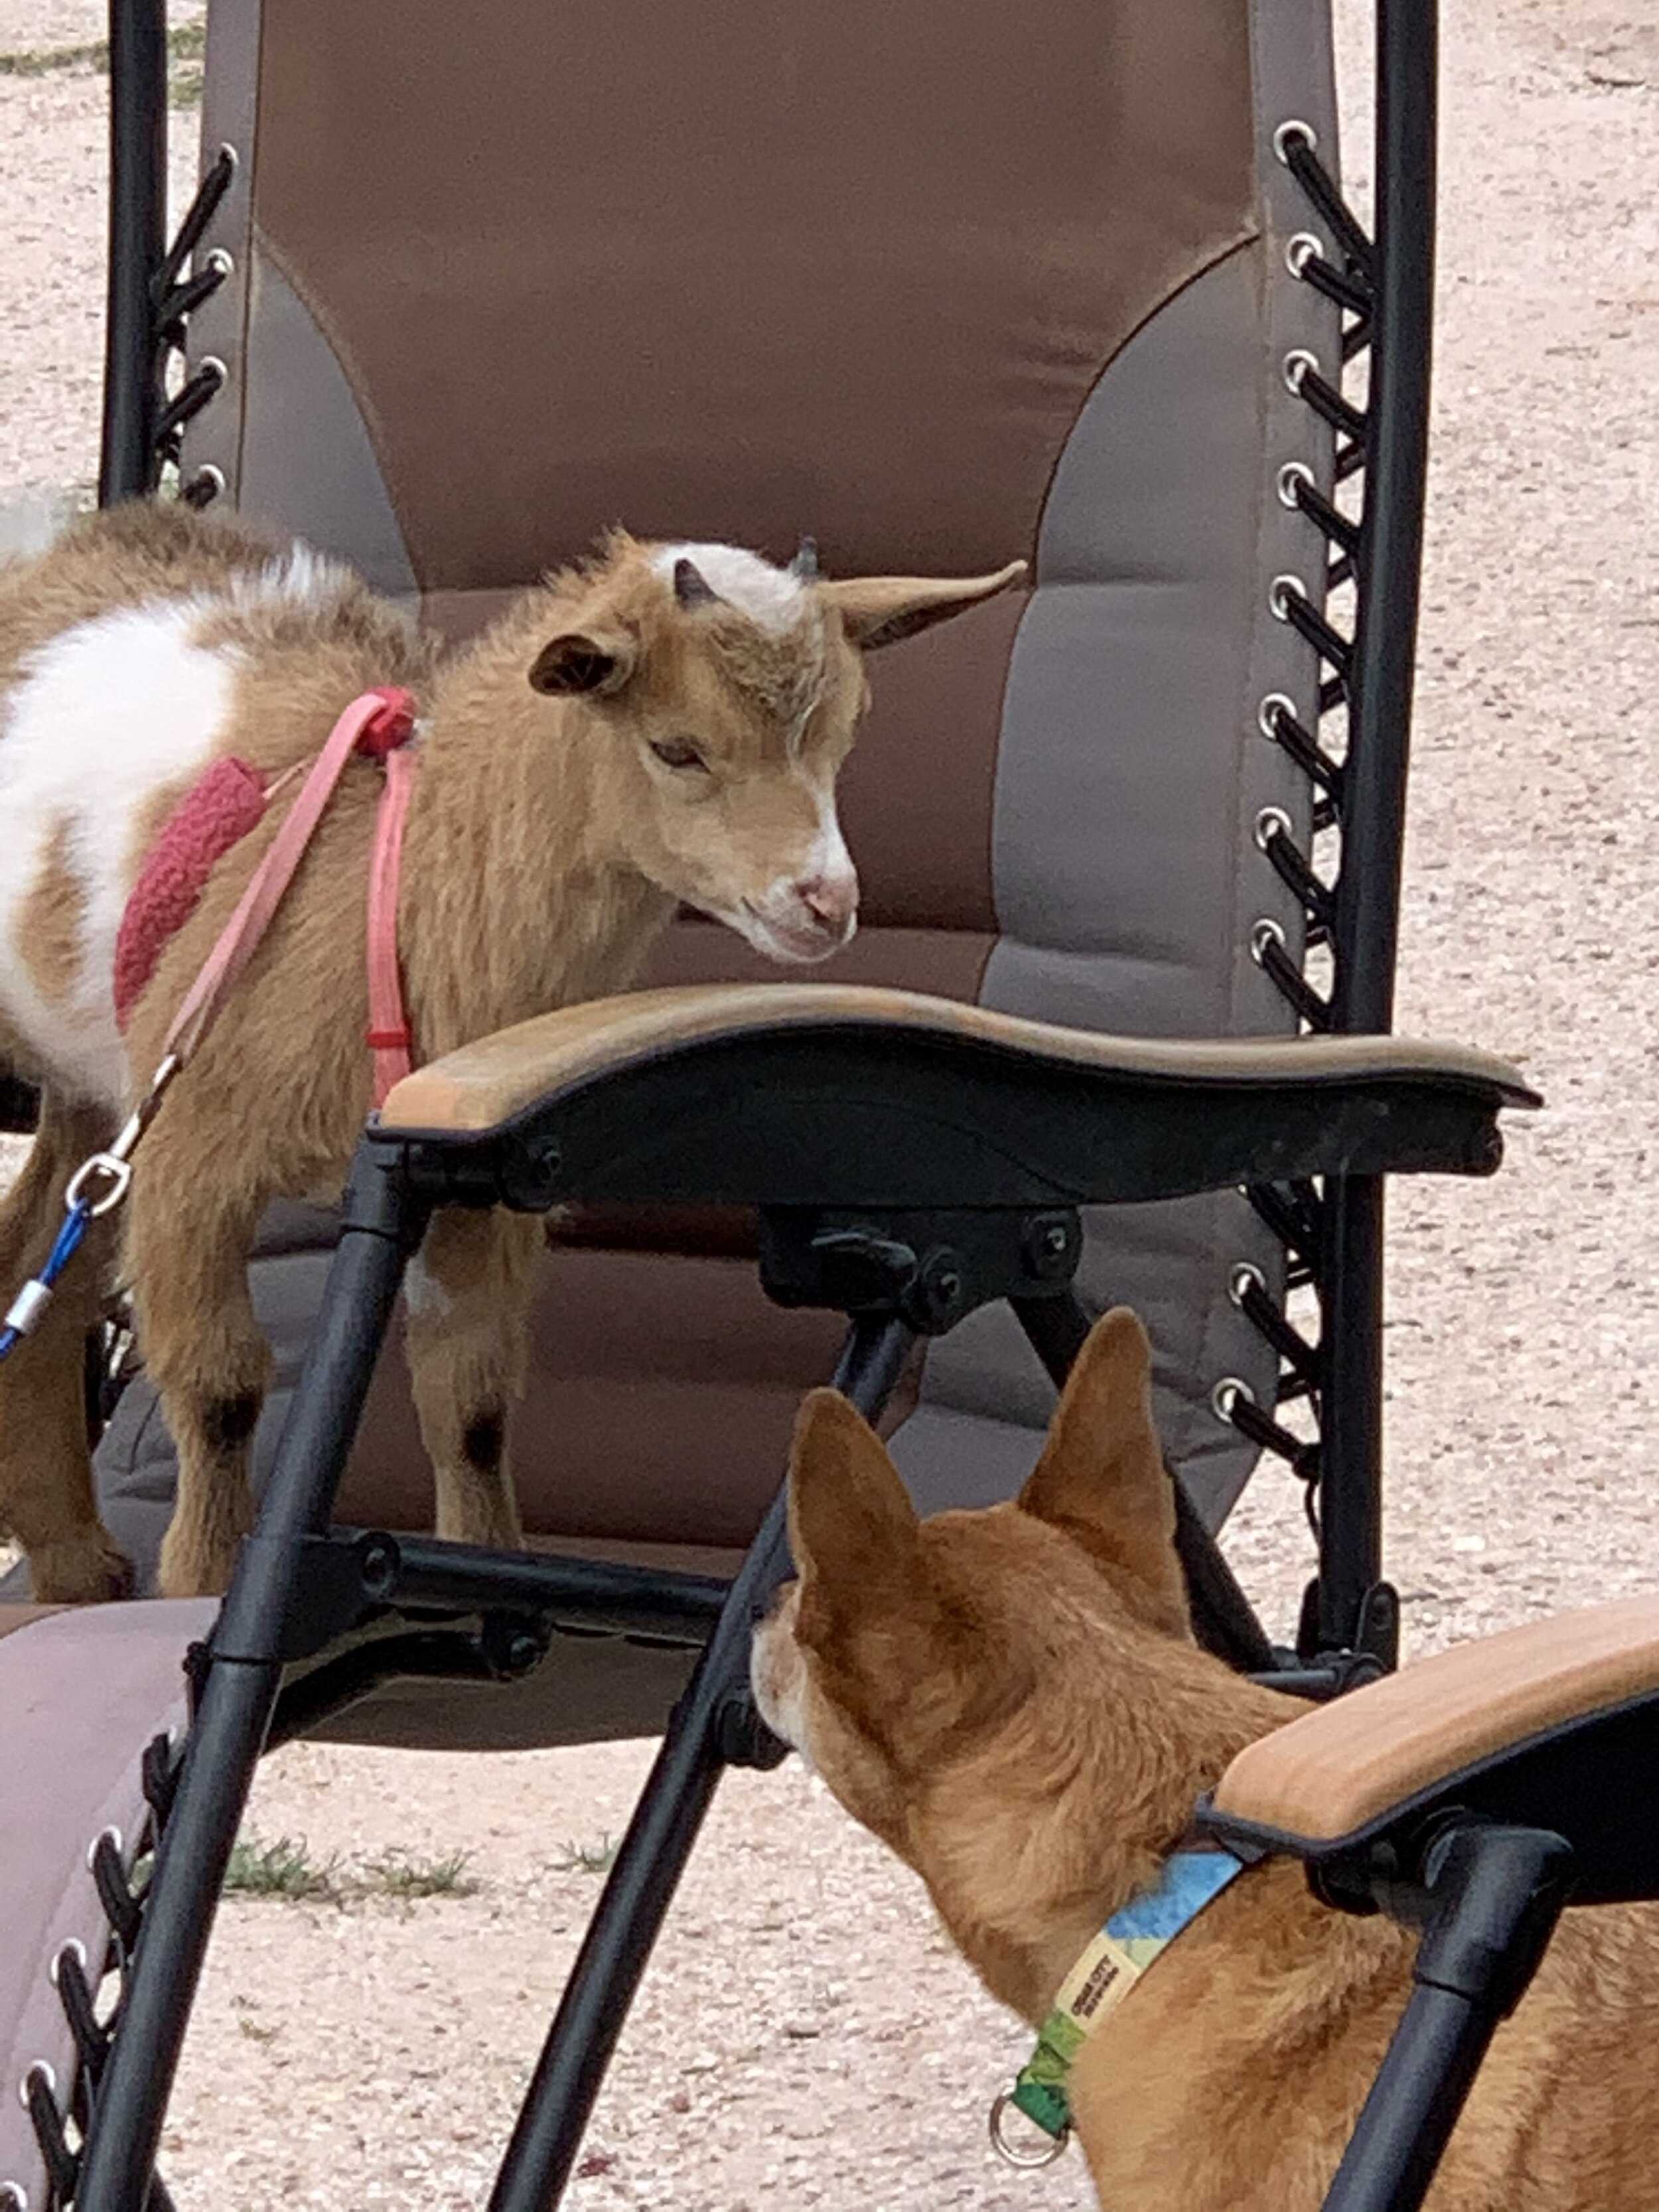  At Roman Nose, our RV neighbors had a baby goat. They had to bring it on vacation because it had no mother, it required feeding every few hours. Clay typically doesn’t care for dogs, but was extremely curious about this kid! 